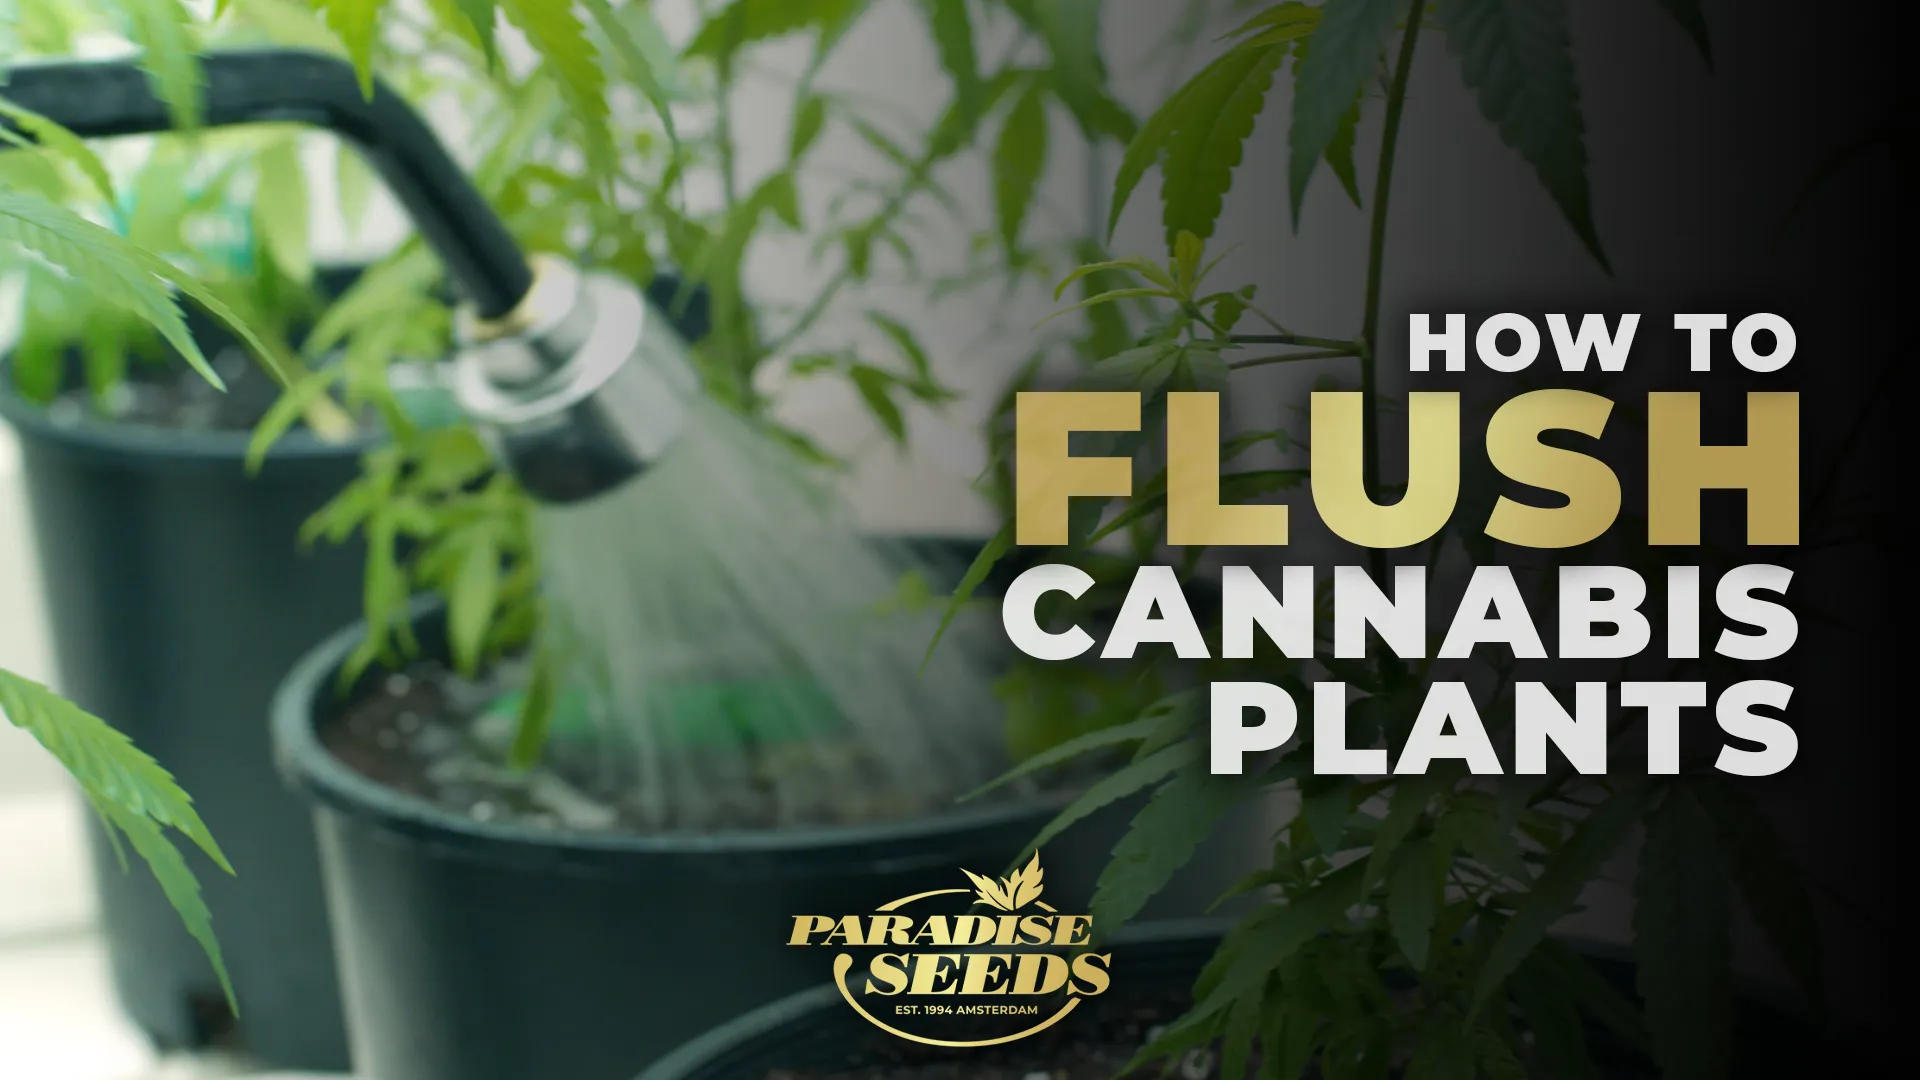 How To Flush Cannabis Plants Correctly